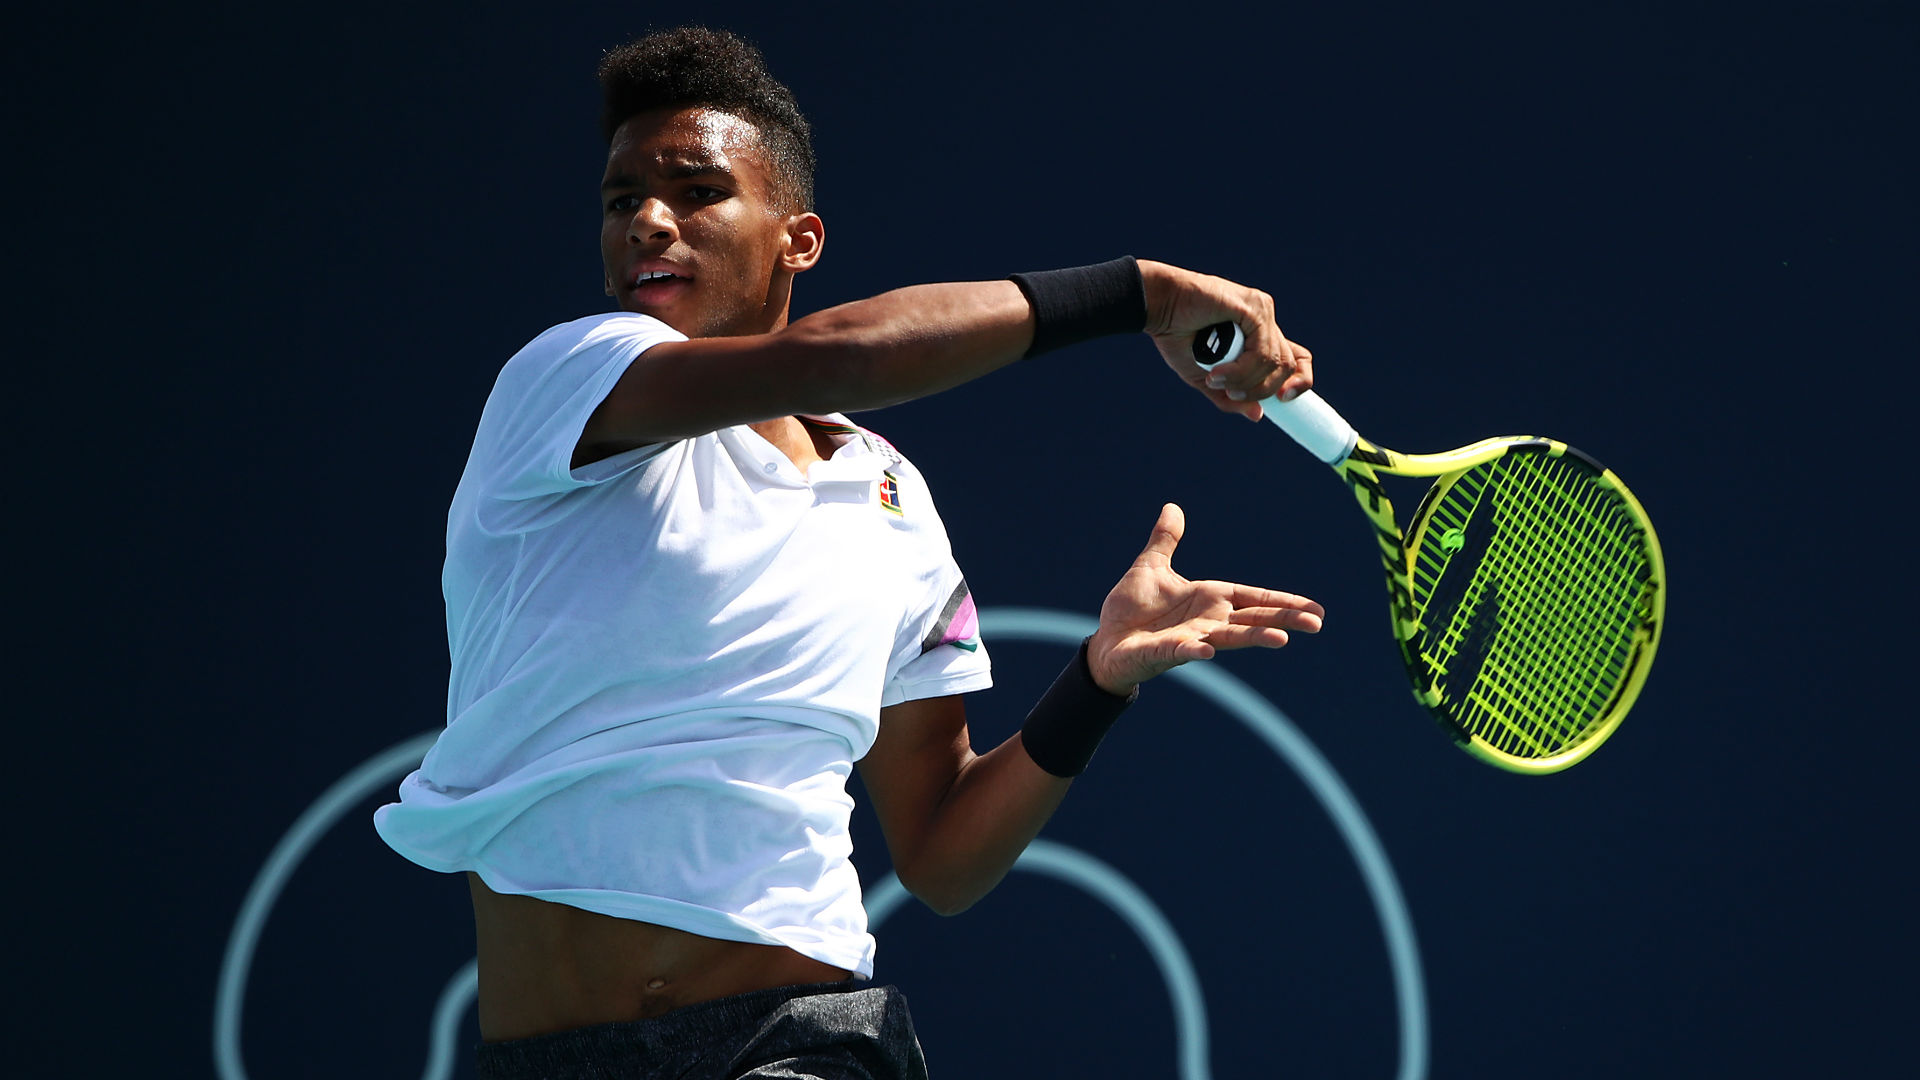 Miami Open 2019: Felix Auger-Aliassime moves on to second round with win over Casper Ruud ...